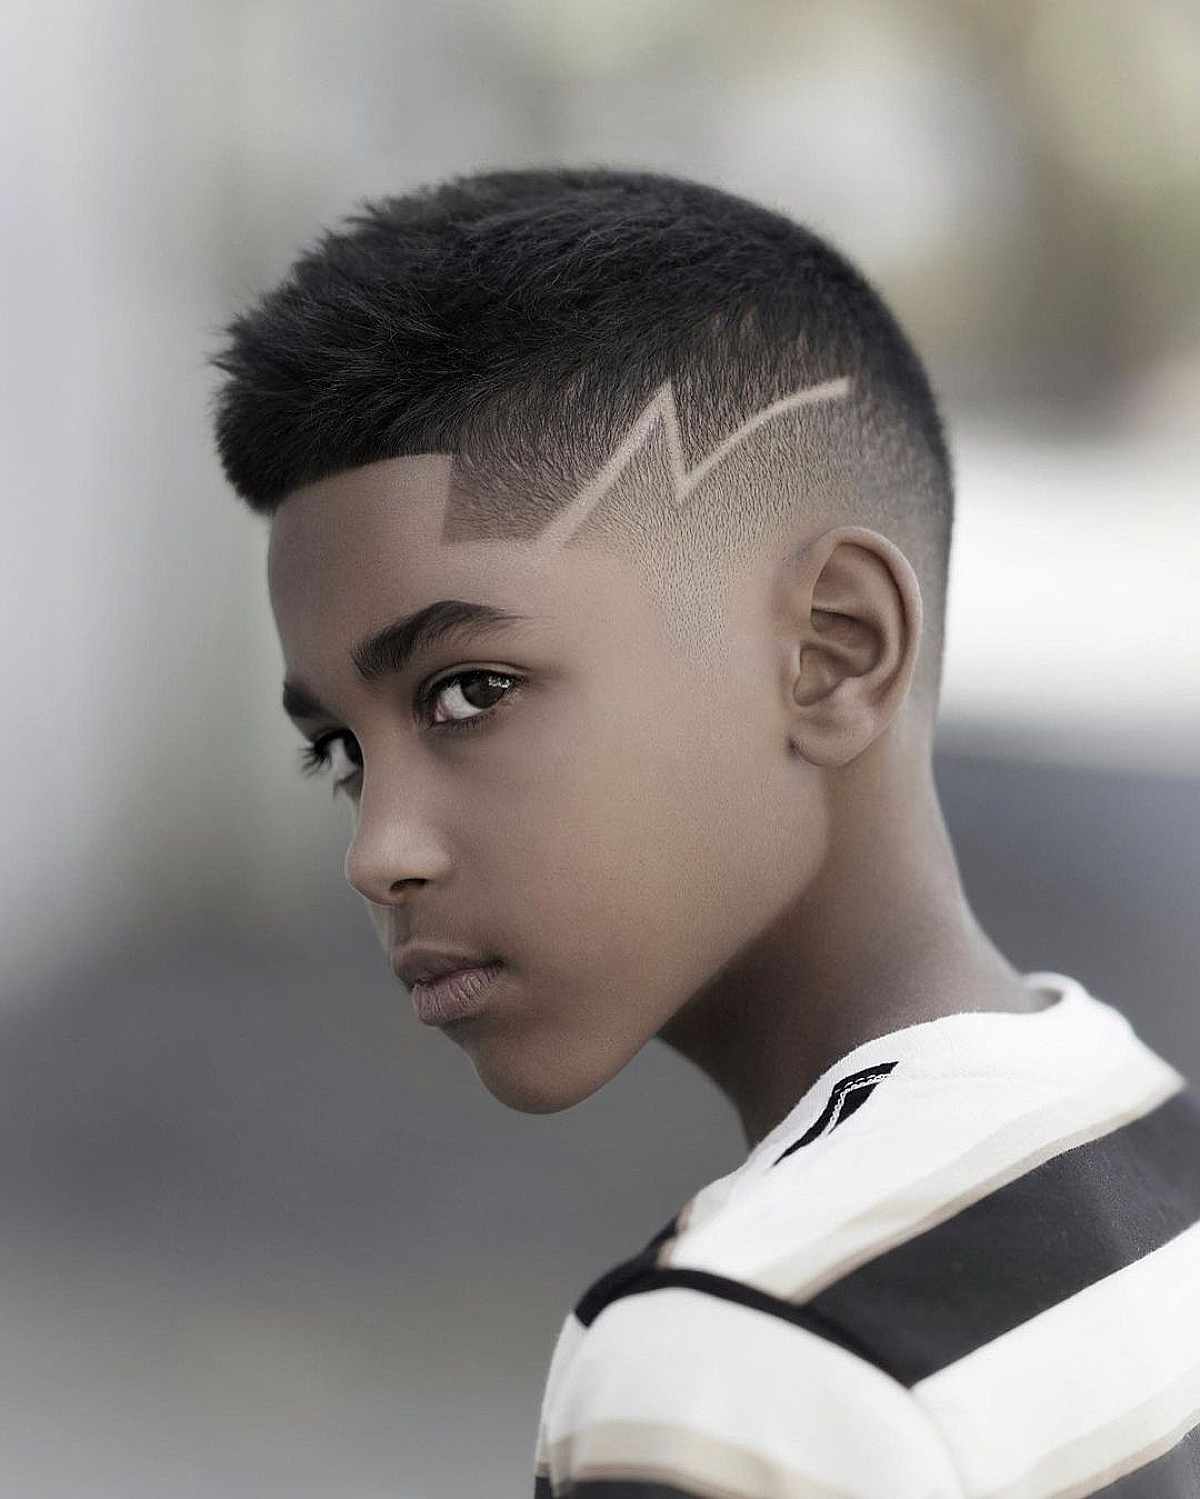 7,708 Boys Hair Silhouette Collection Images, Stock Photos & Vectors |  Shutterstock